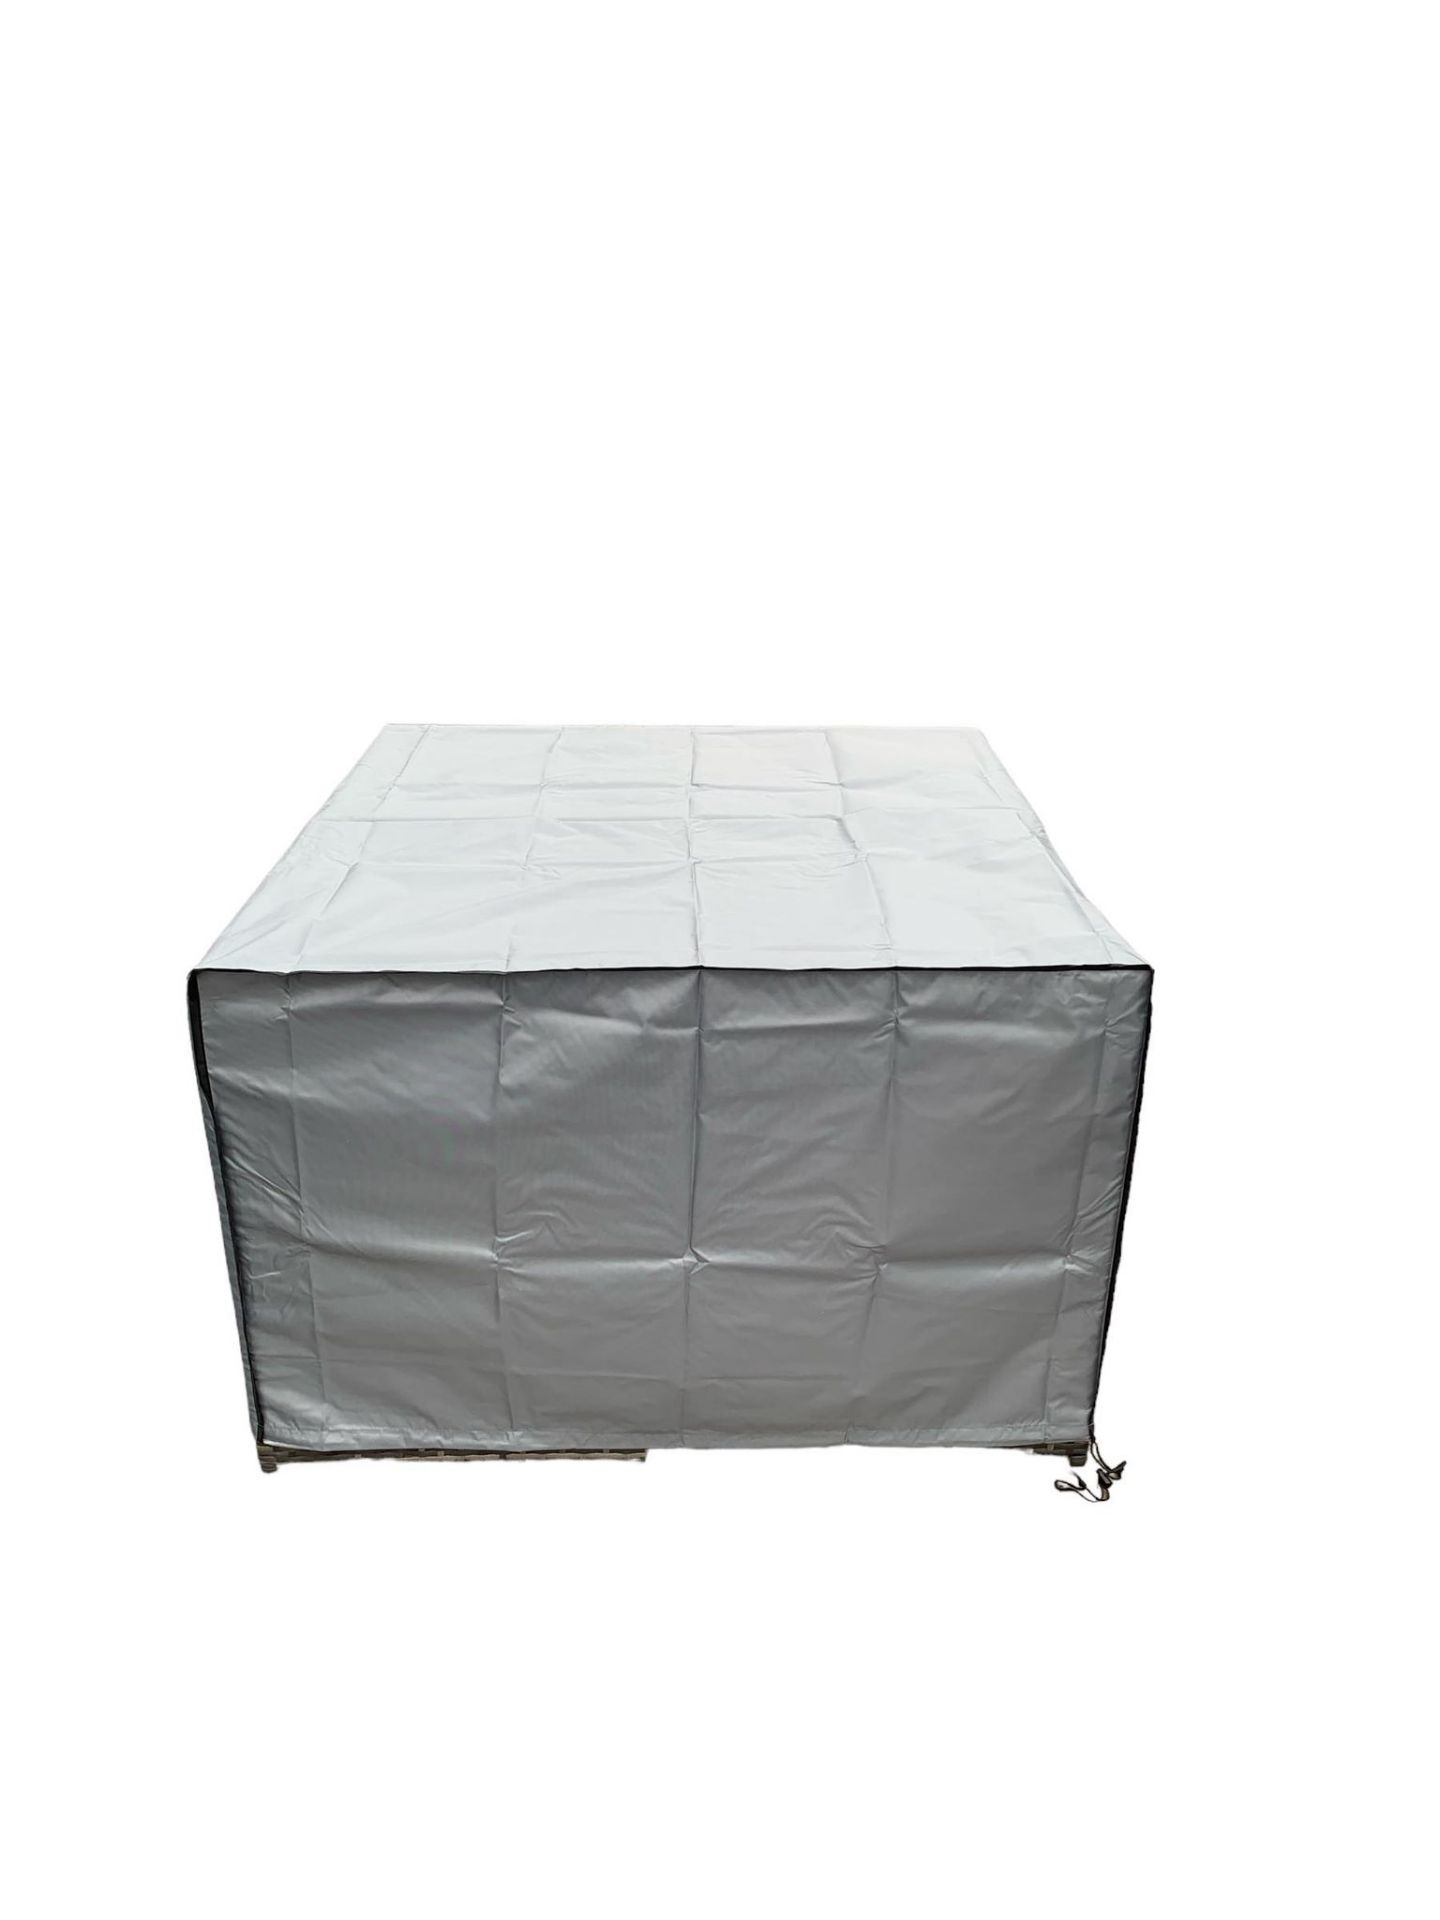 BRAND NEW BLACK CUBE GARDEN FURNITURE SET OUTDOOR 9 PIECES + RAIN COVER - Image 2 of 3